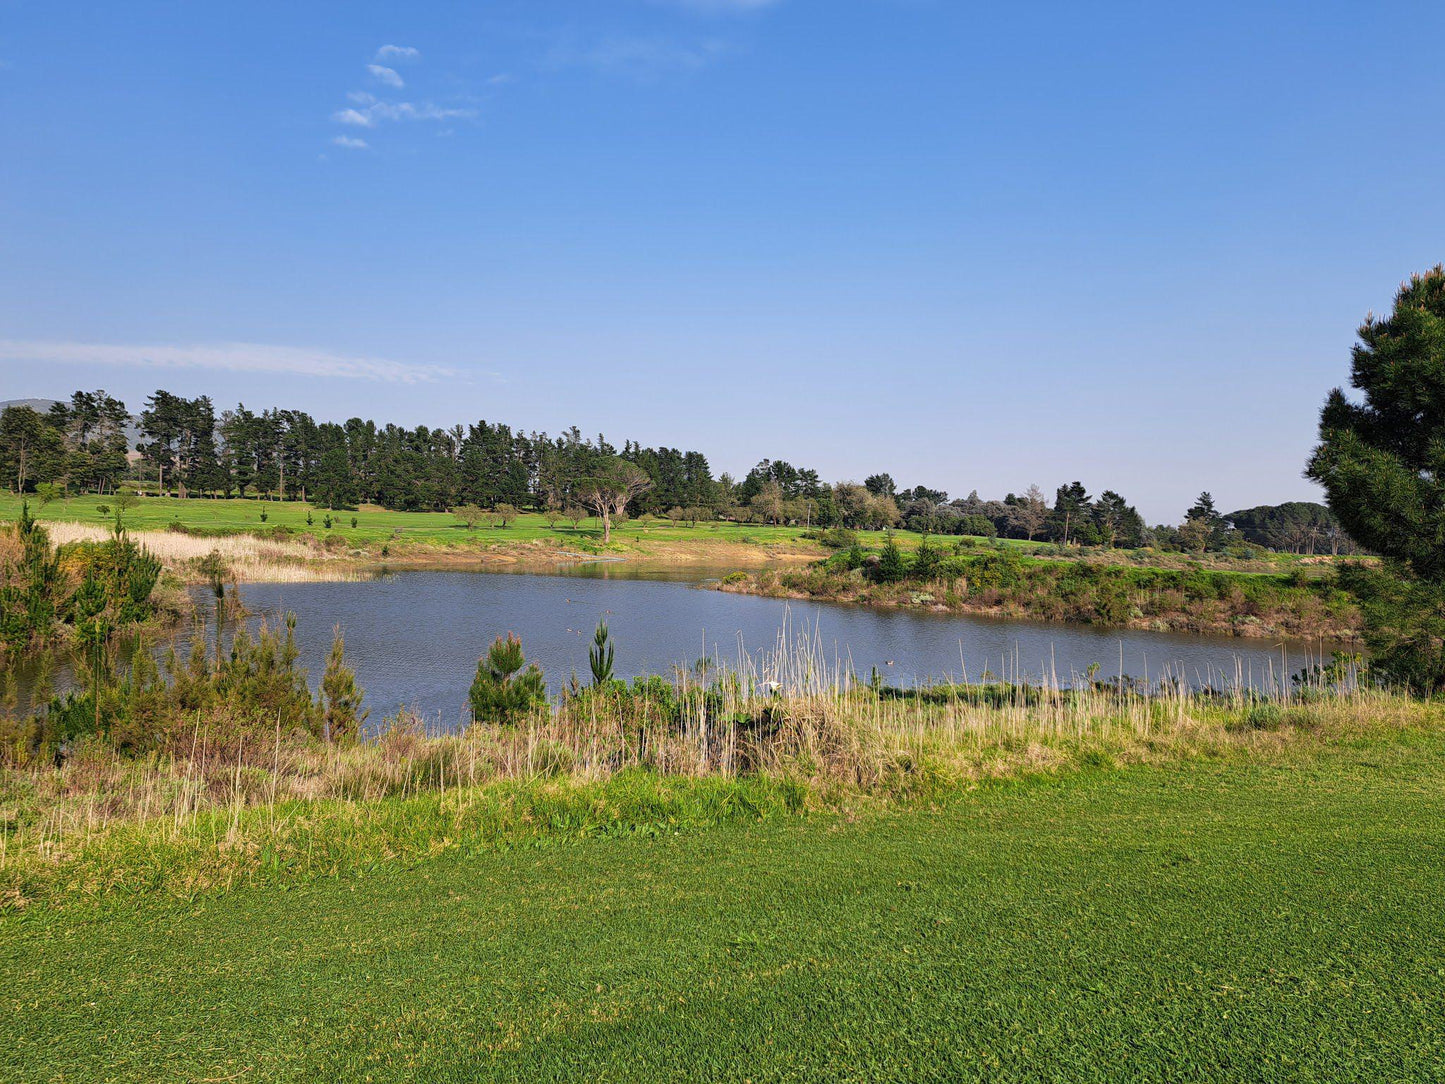 Nature, Complementary Colors, Ball Game, Sport, Golfing, Waters, River, Devonvale Golf & Wine Estate, Bottelary Rd, Devonvale Golf & Wine Estate, Stellenbosch, 7600